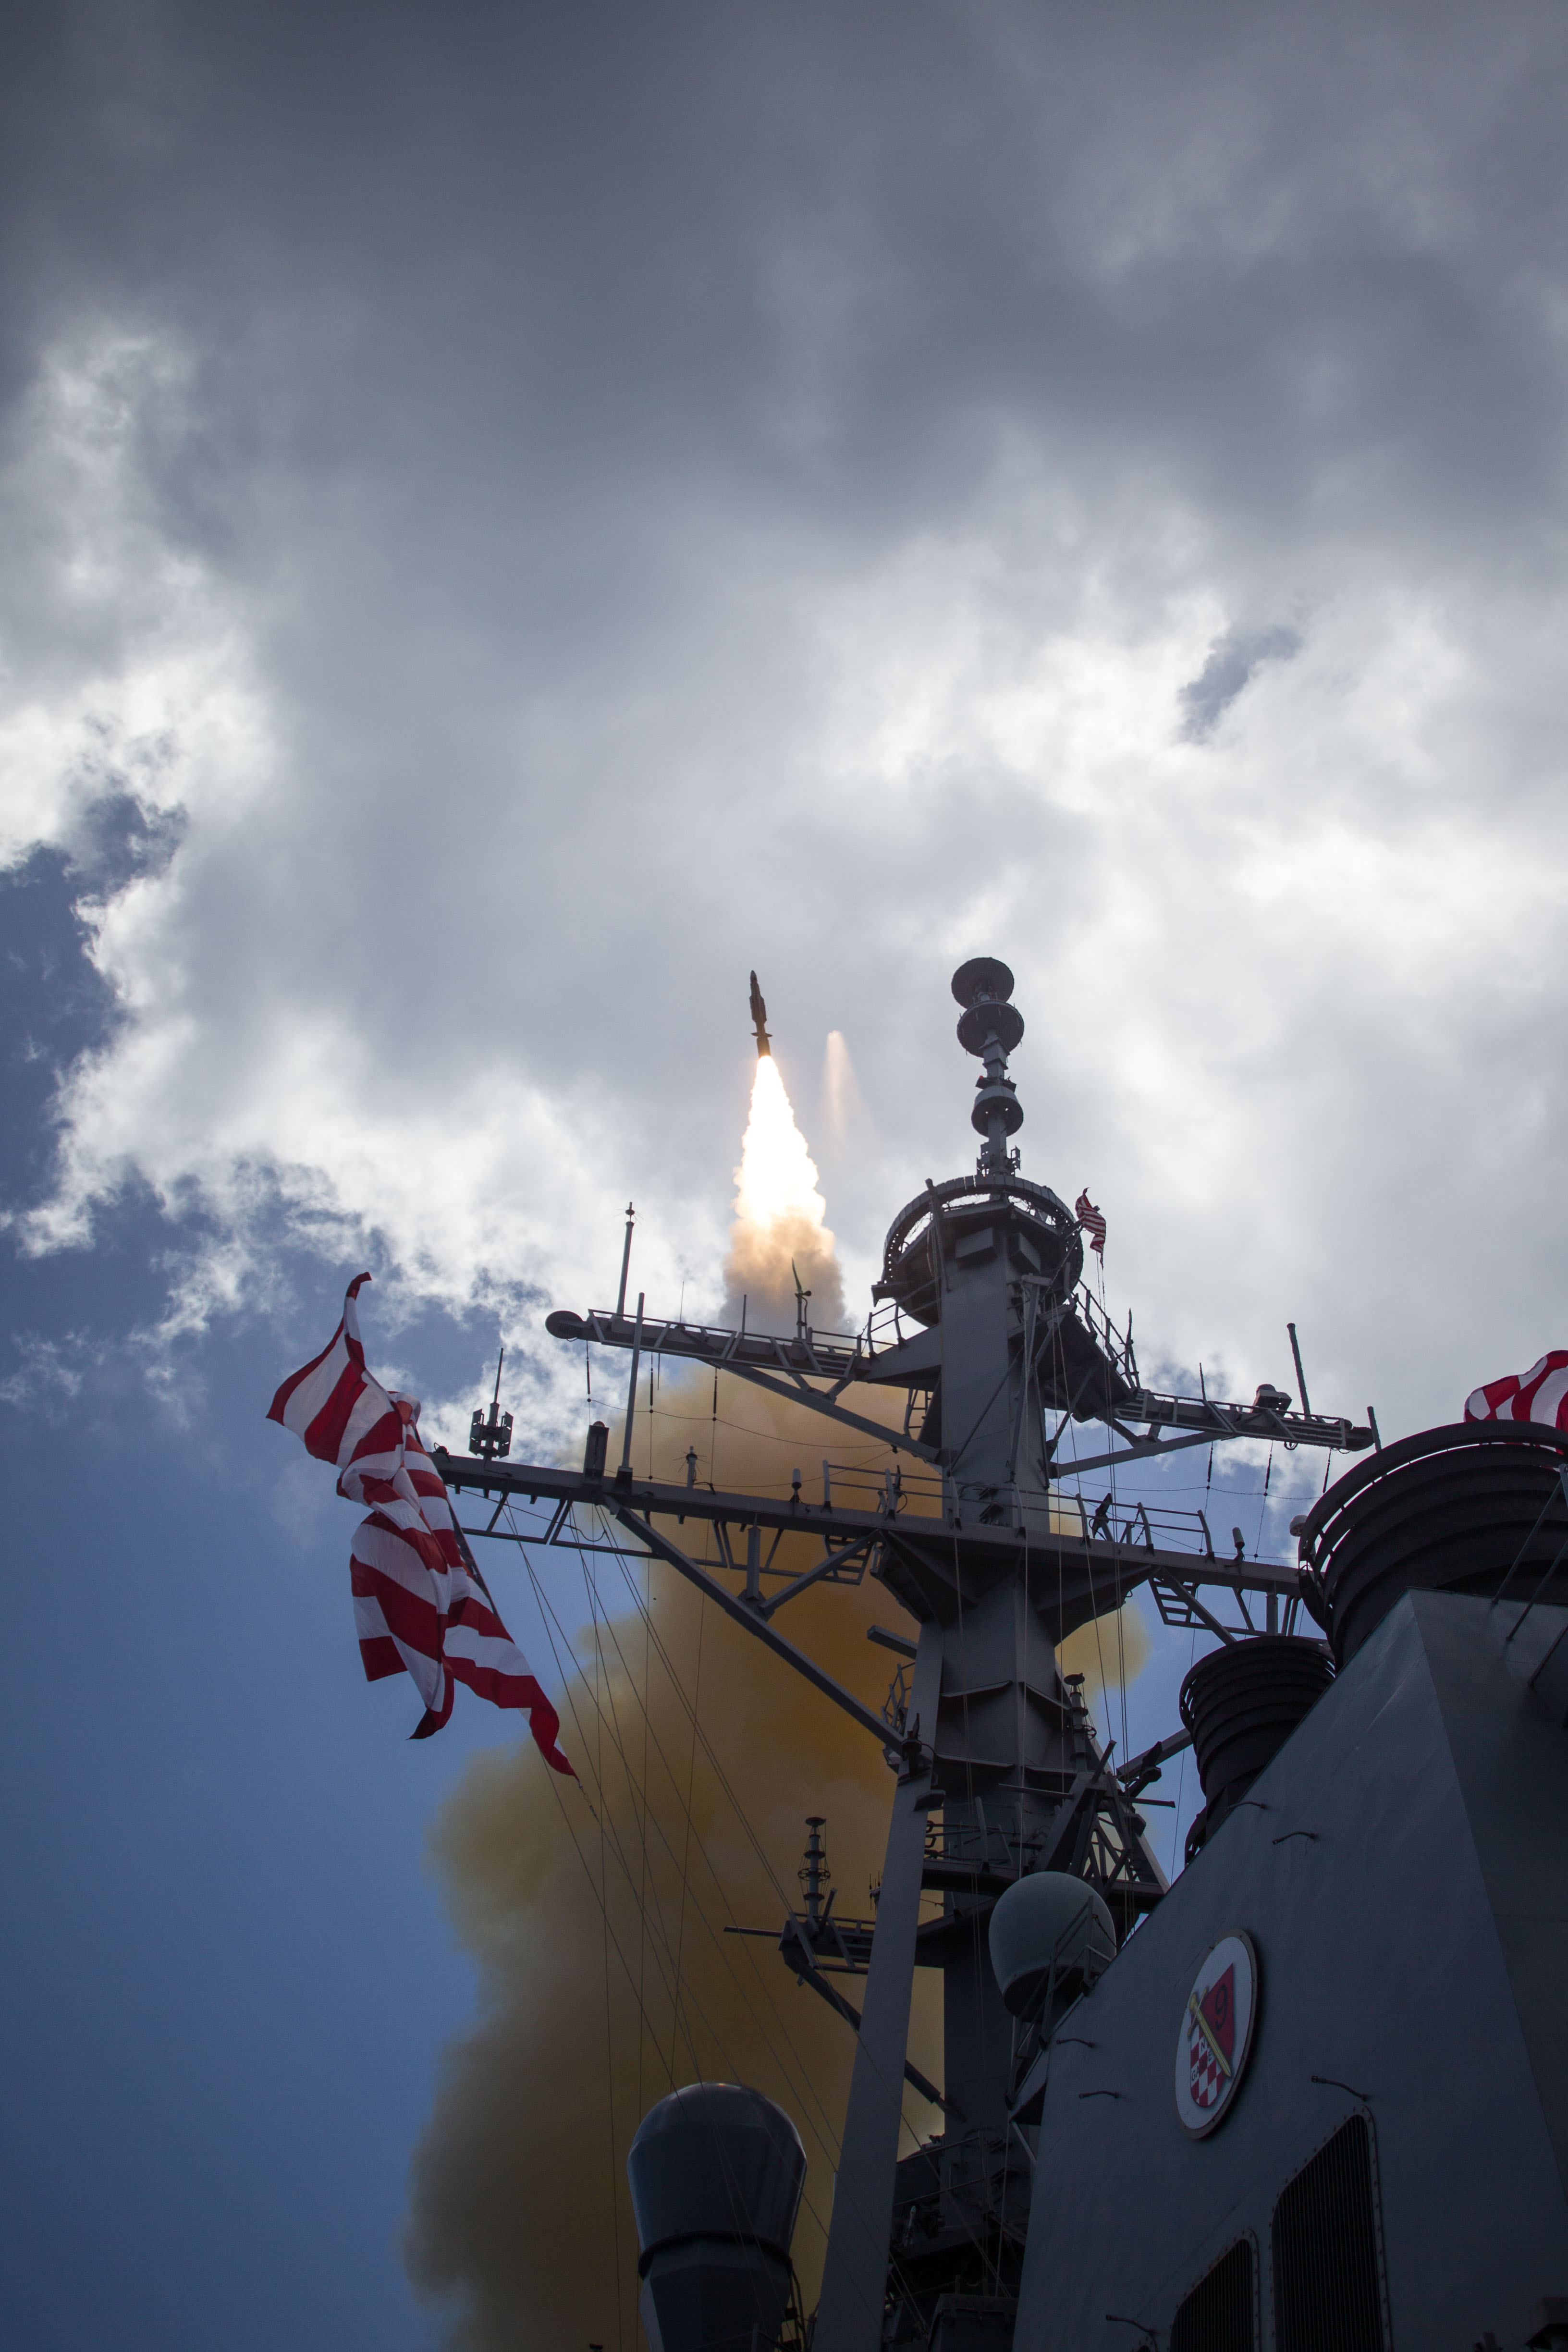 USS John Paul Jones (DDG 53) successfully conducted a flight test involving the launch of a medium-range ballistic missile target from the Pacific Missile Range Facility located on Kauai, Hawaii on May 17, 2016. MDA Photo